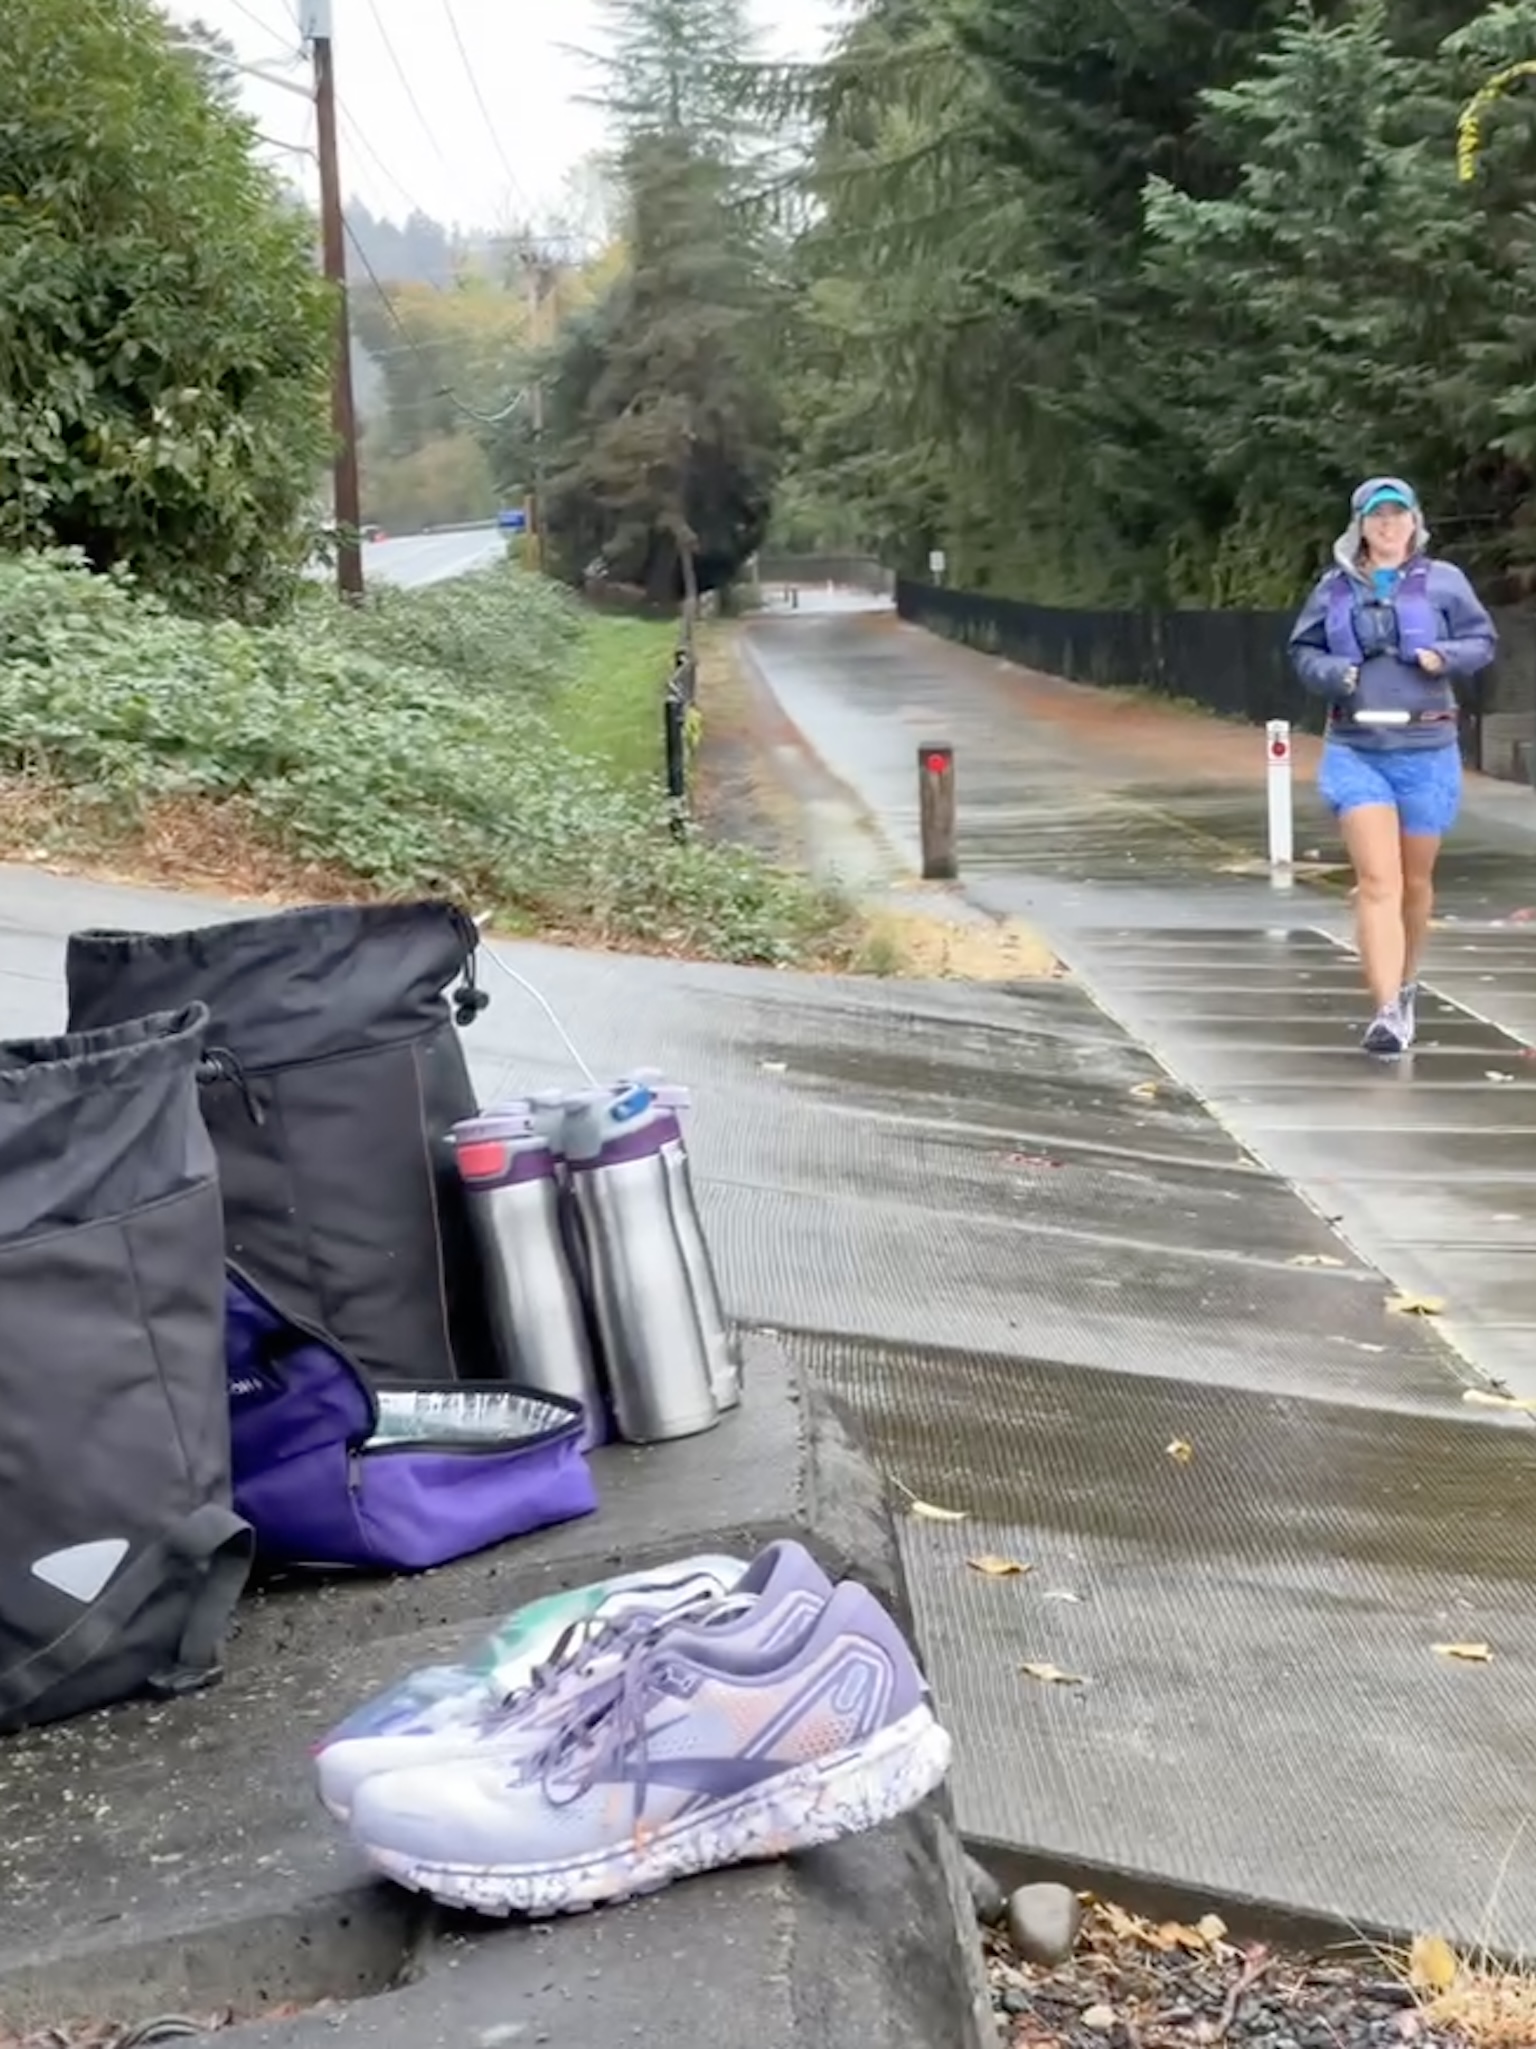 A picture of Dana Lewis running down the rainy paved trail, with resupply gear (dry shoes, water, fuel) in the foreground of the picture. She's wearing shorts, a rain jacket, and a rain hat. She is smiling and around 12 miles into her eventual 82 mile run).